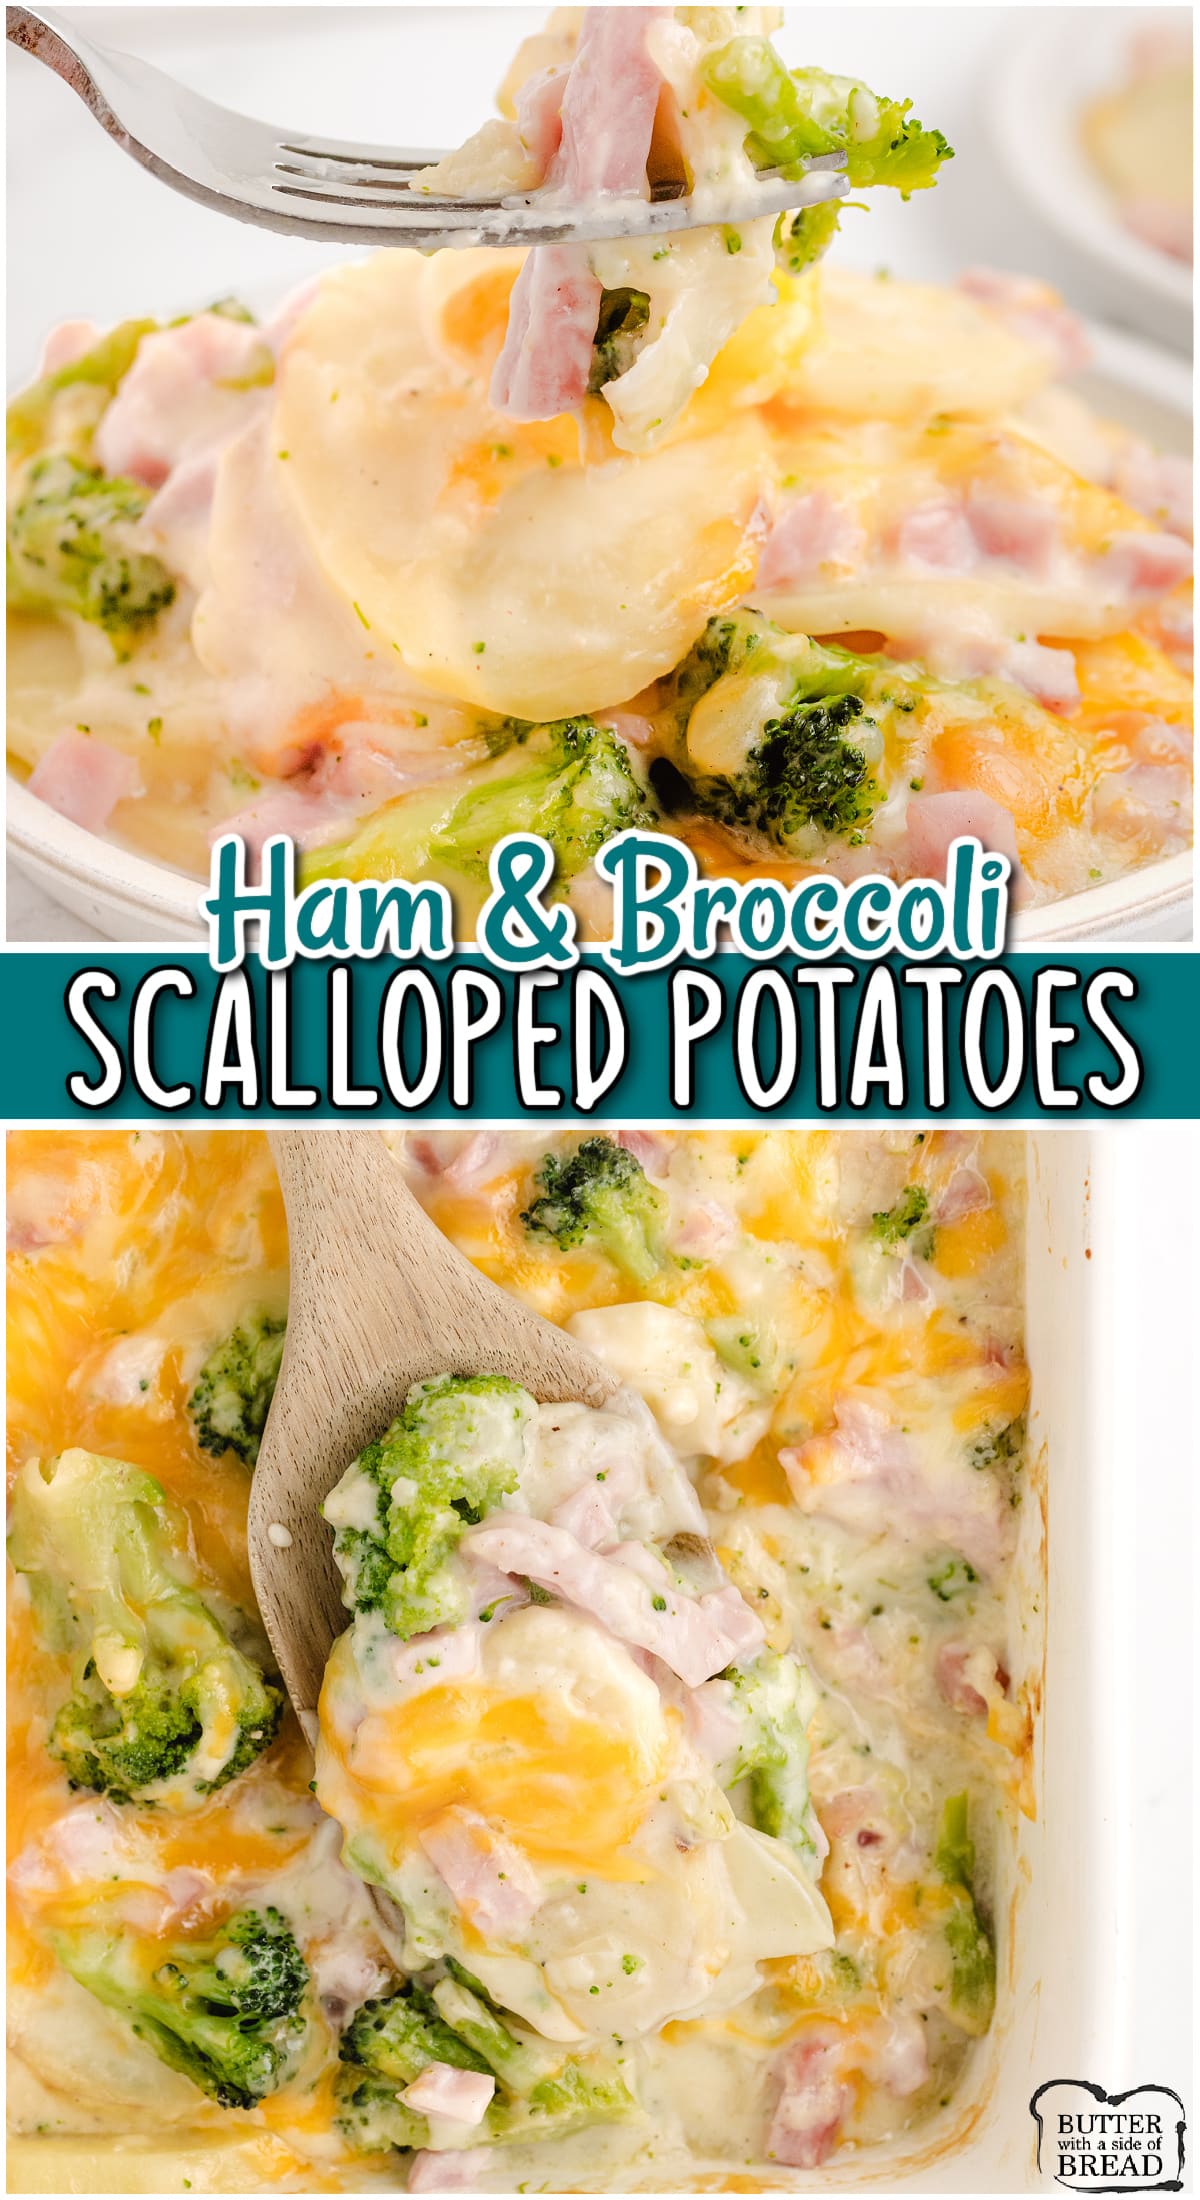 Ham & Broccoli Scalloped Potatoes made from scratch with milk, butter, cheese, potatoes, ham & broccoli. Flavorful, comforting dinner that everyone loves! 